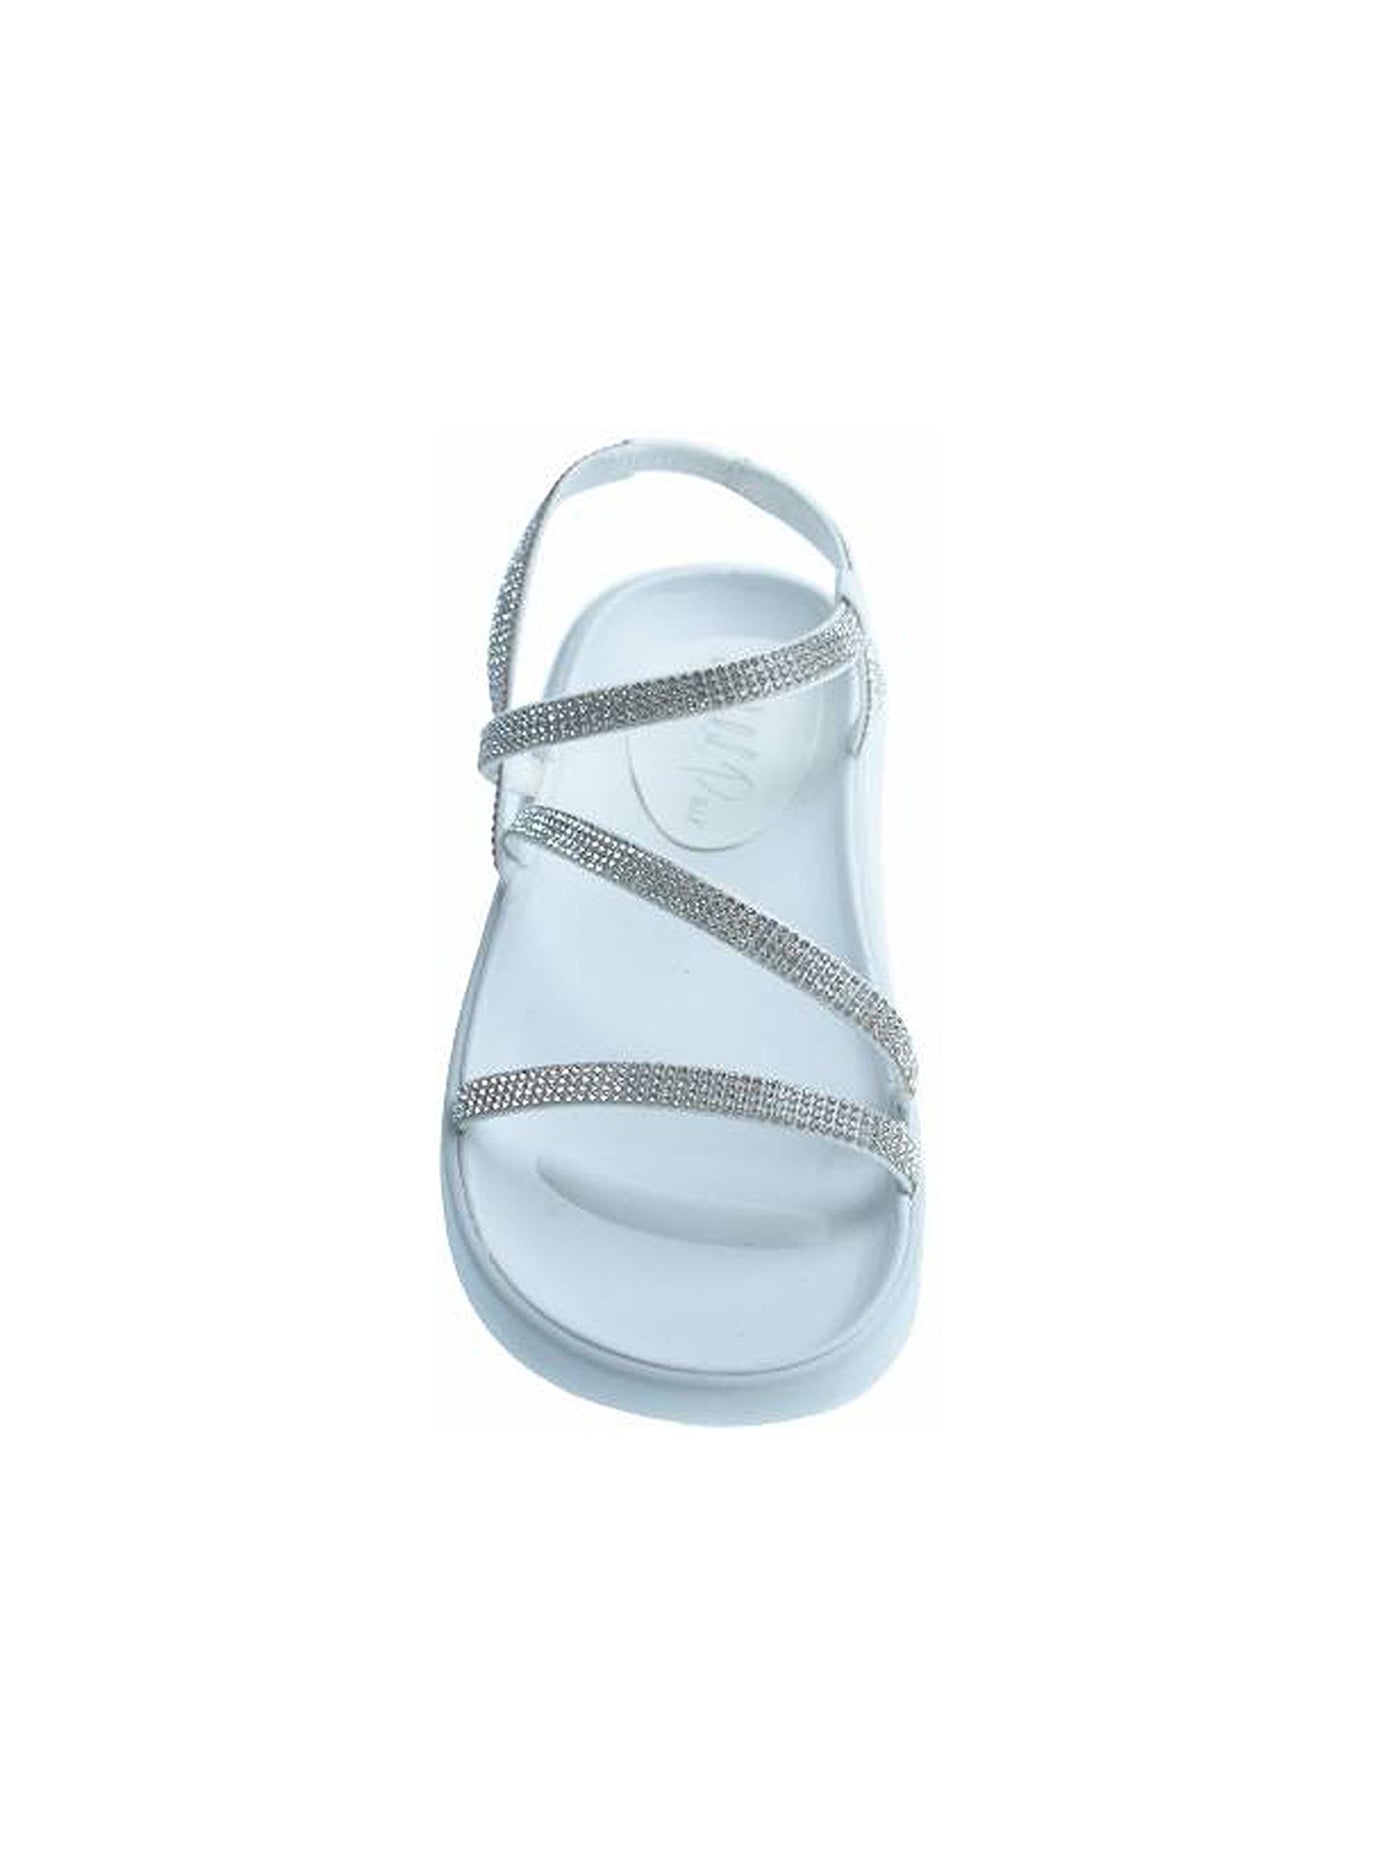 WILD PAIR Womens White Strappy Shimmering Ankle Strap Rhinestone Prudence Round Toe Slip On Sandals Shoes 9 M